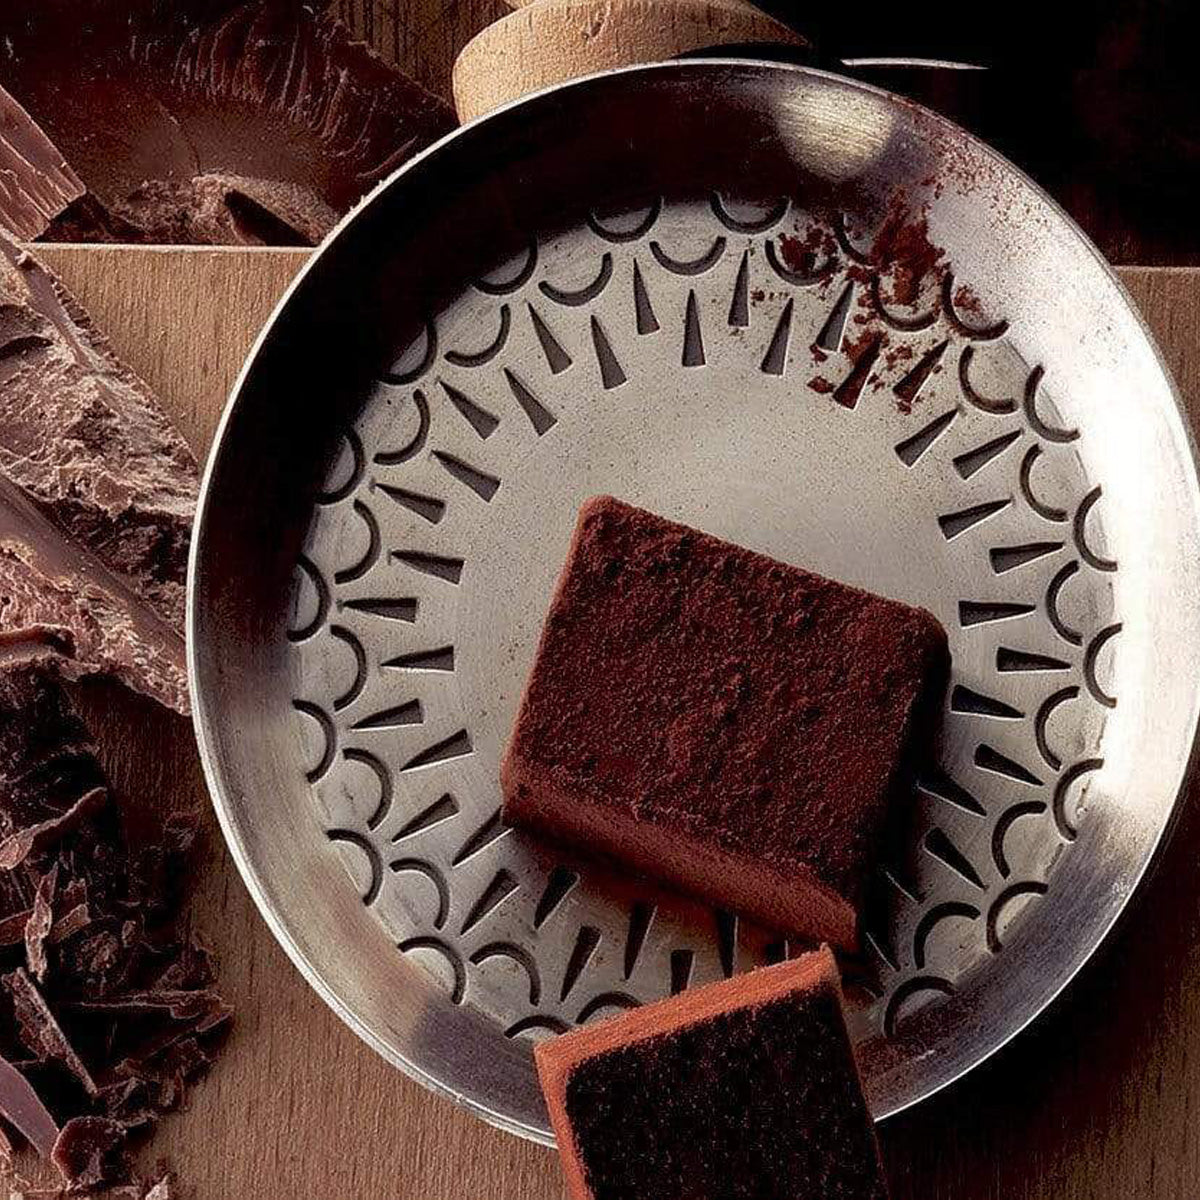 ROYCE' Chocolate - Nama Chocolate "Mild Cacao" - Image shows brown blocks of chocolates on a silver metallic plate. Accents include a brown wooden platform under and brown chocolate shavings on the side.